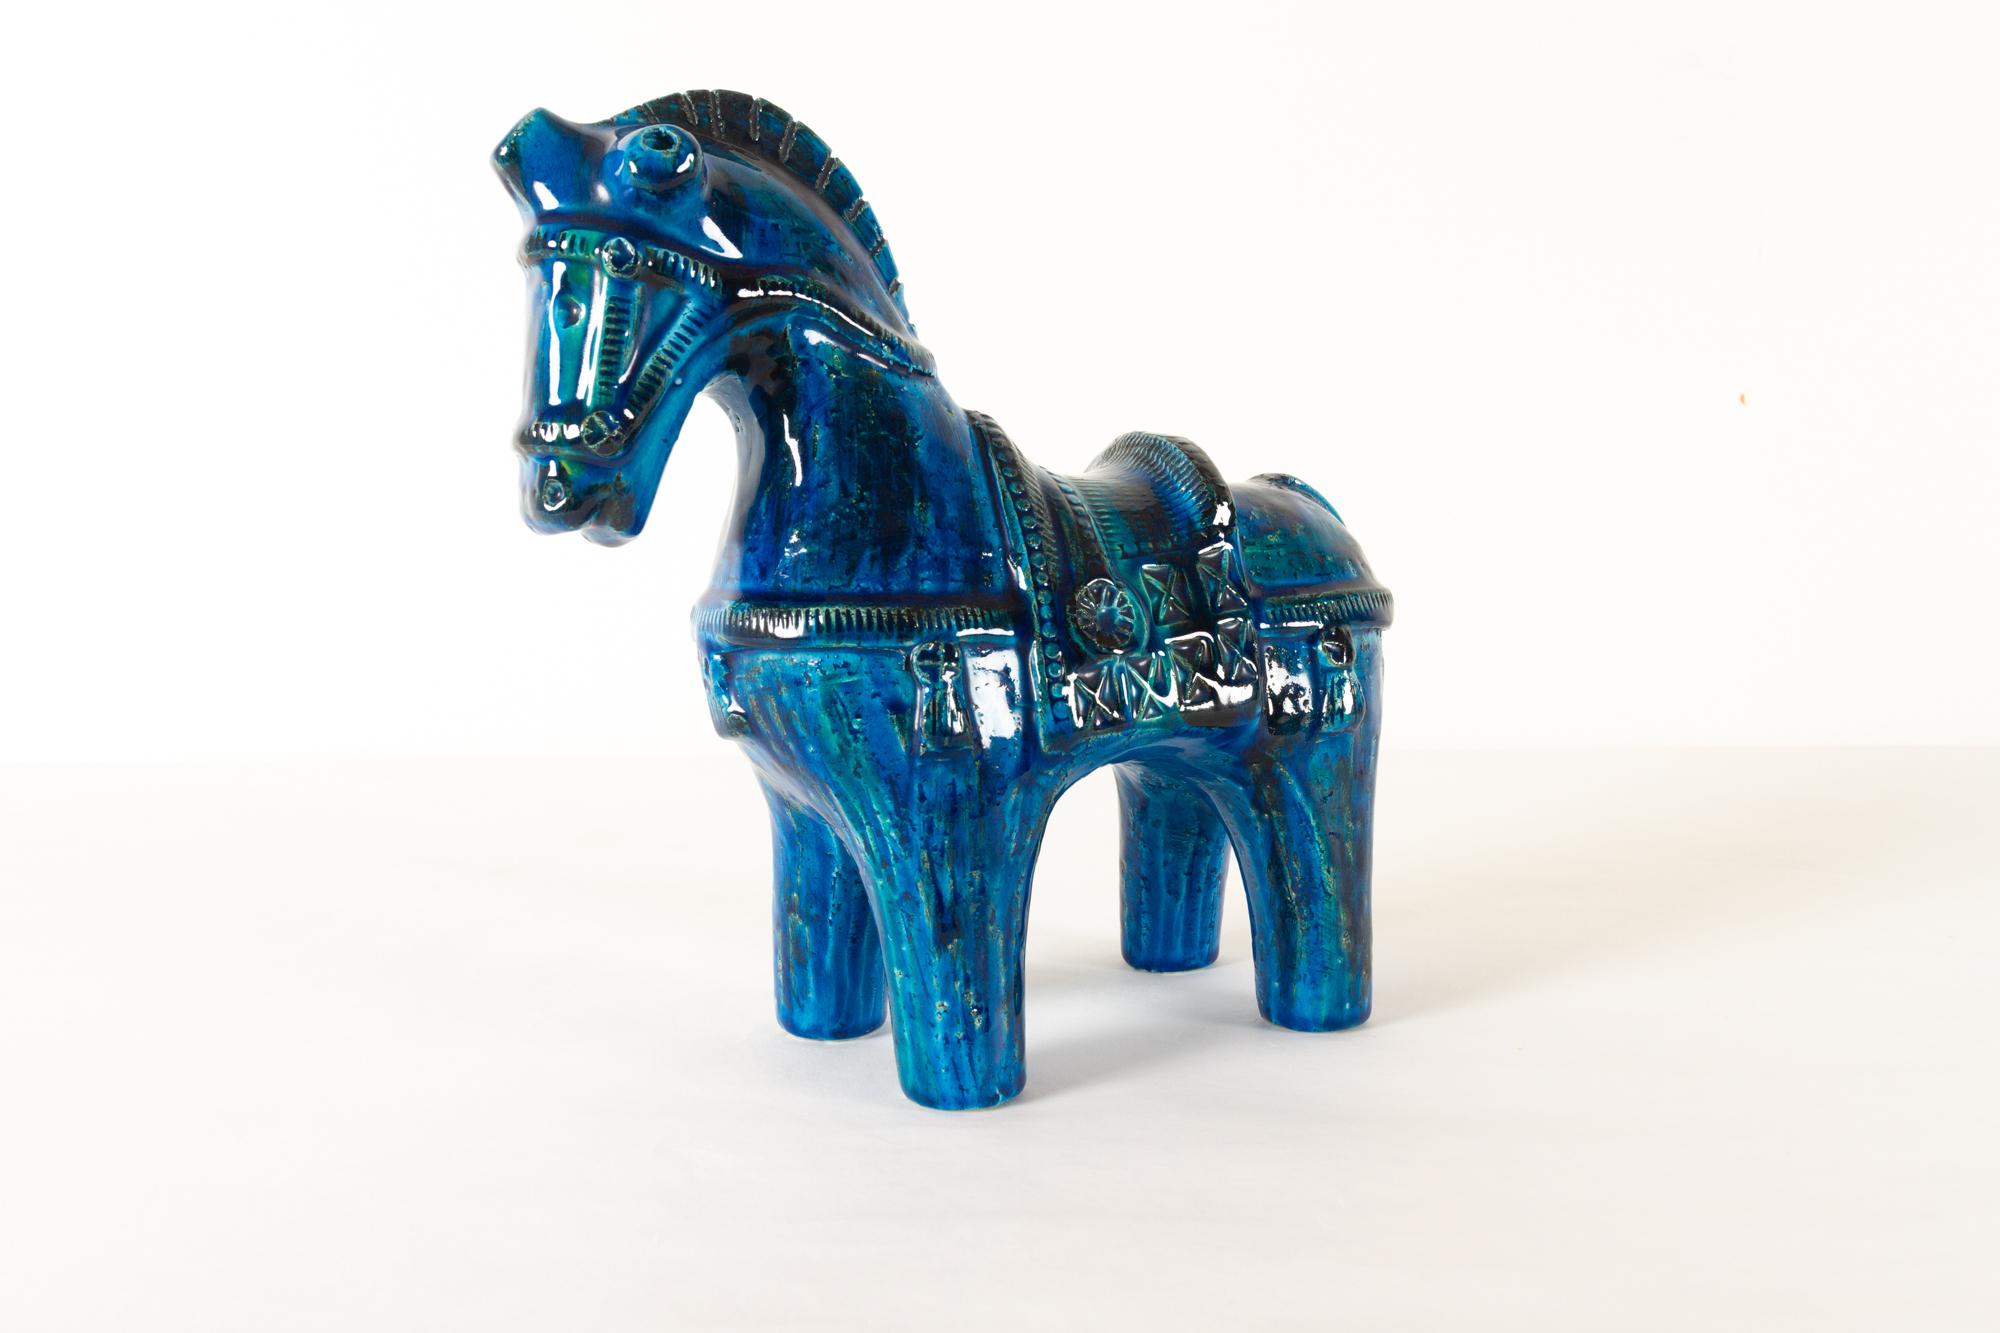 Italian ceramic horse figurine by Aldo Londi for Bitossi 1960s
Sculptural figurine of a saddled horse in Rimini Blu glaze made in Italy. Many beautiful details.
Measures: Height 26.5 cm
No damages.